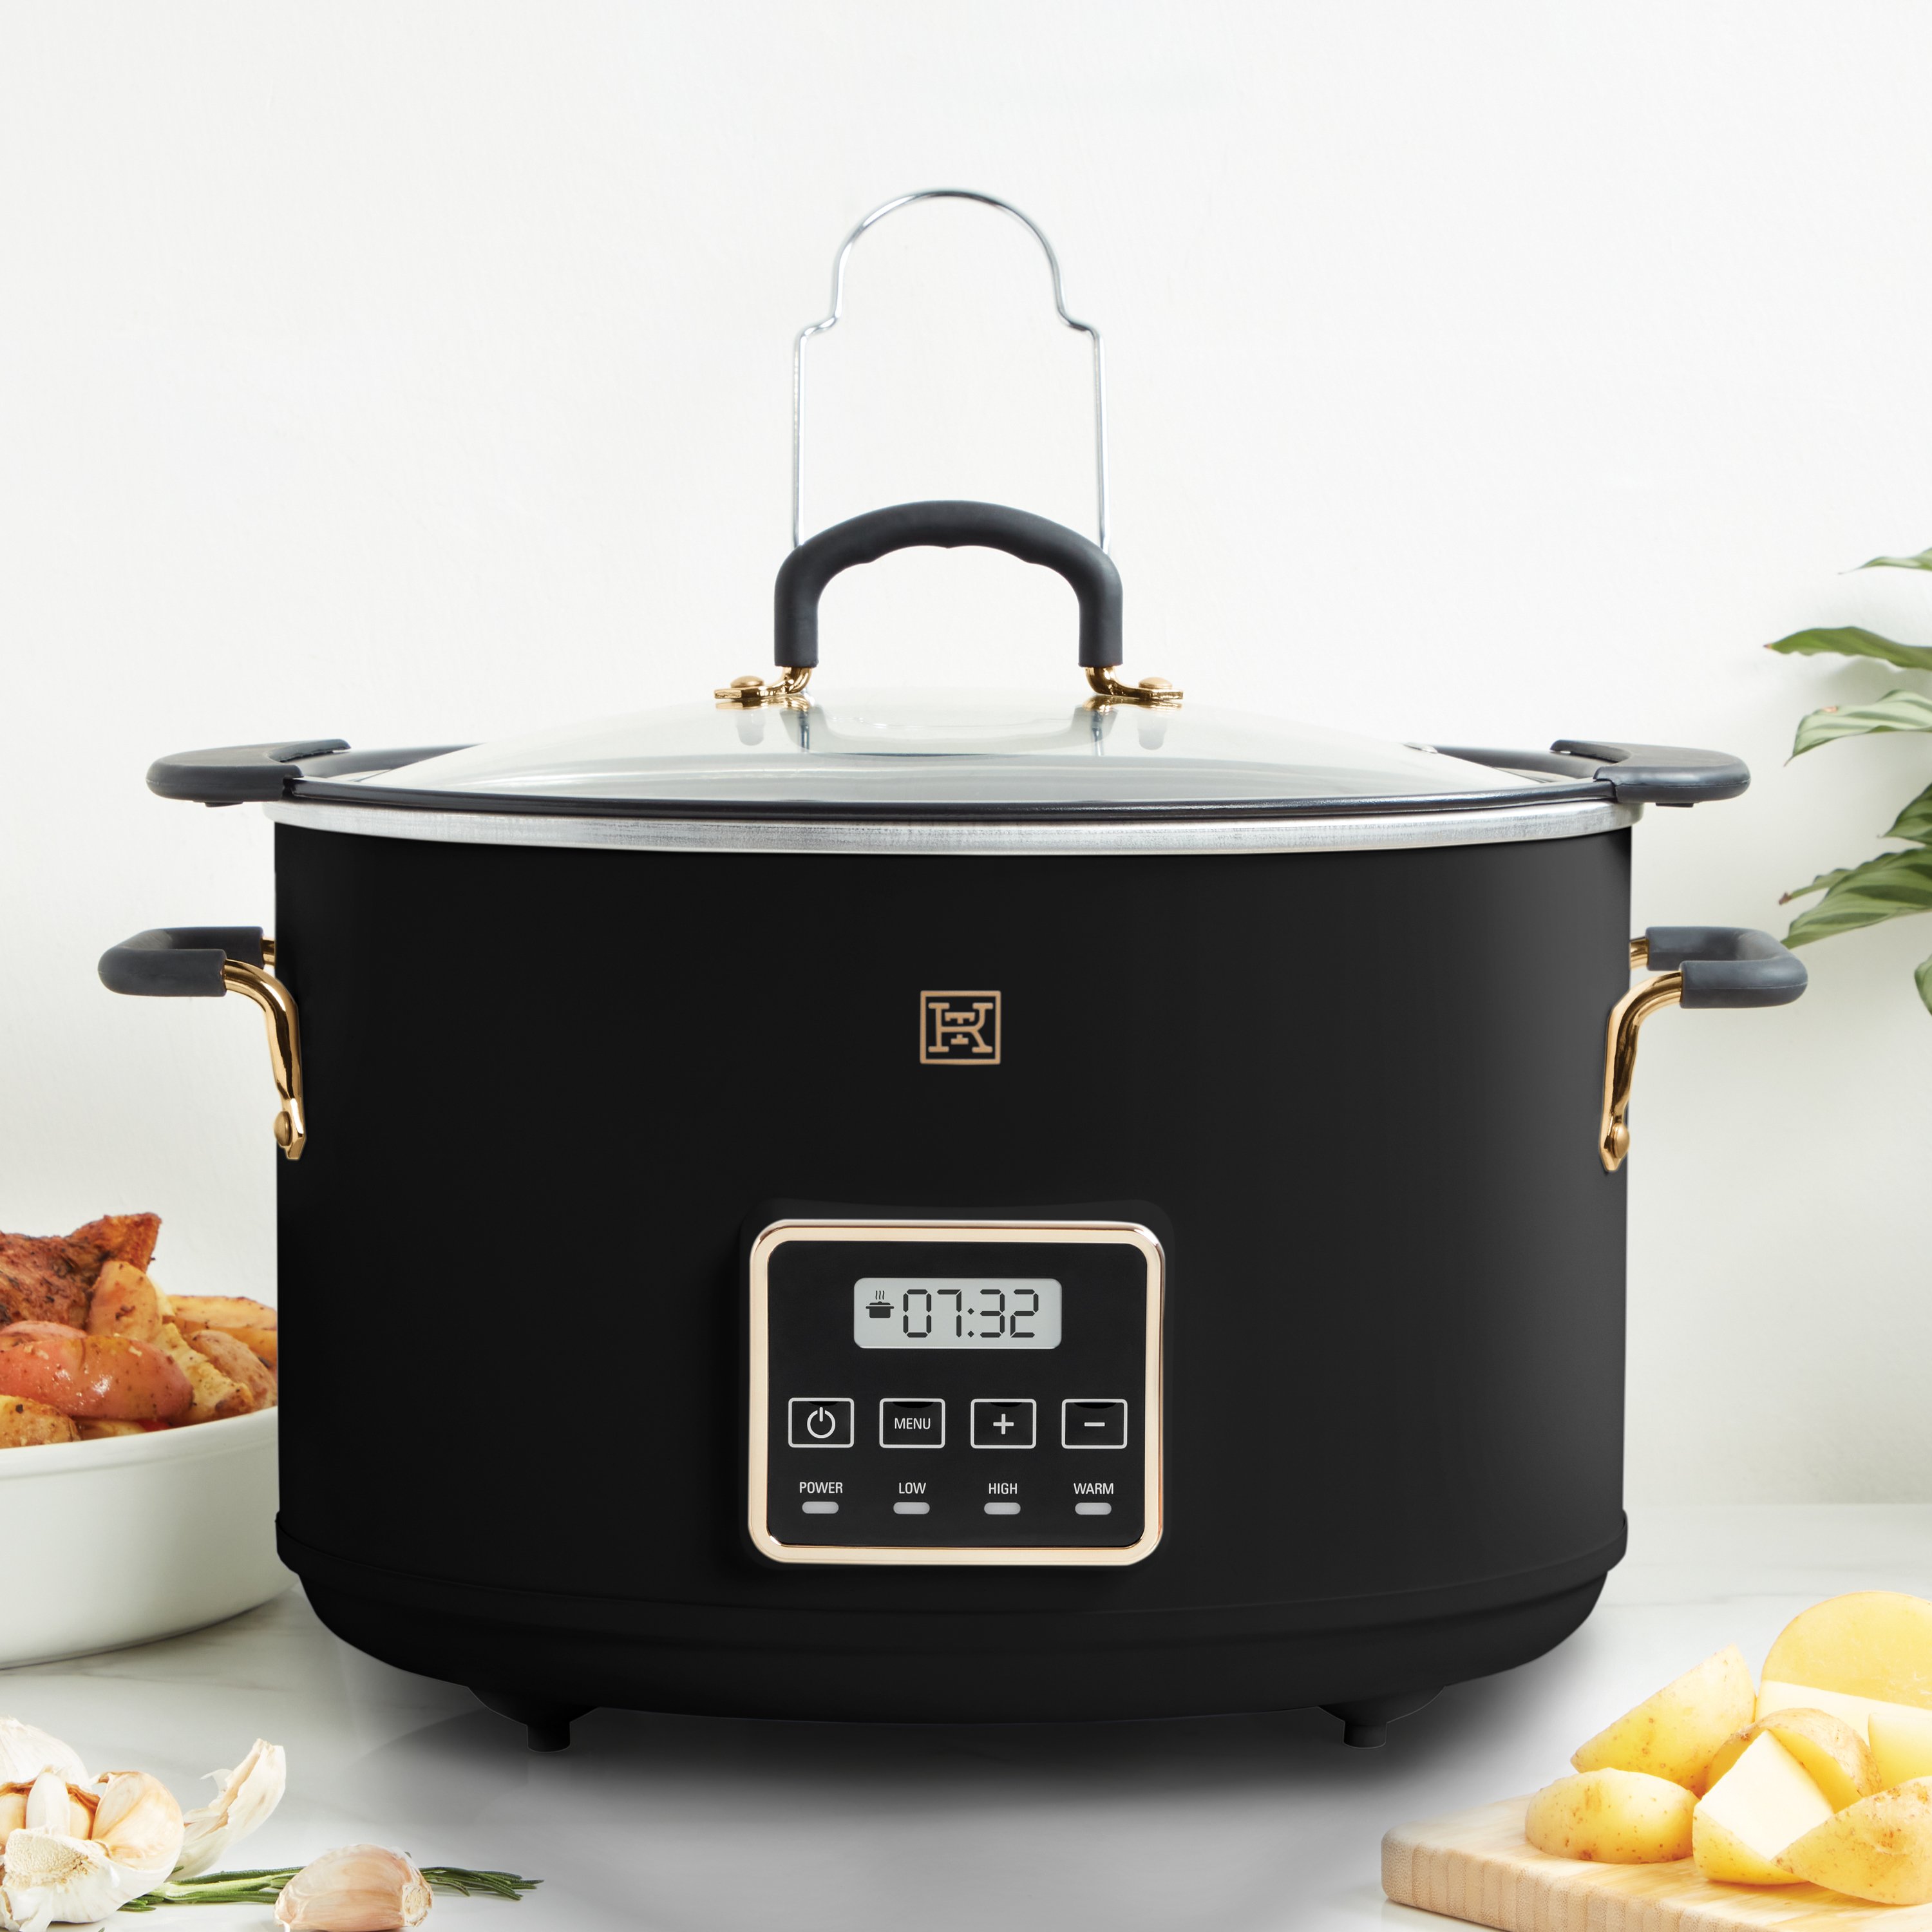 Kitchen & Table by H-E-B Digital Rice Cooker & Food Steamer - Classic Black  - Shop Cookers & Roasters at H-E-B